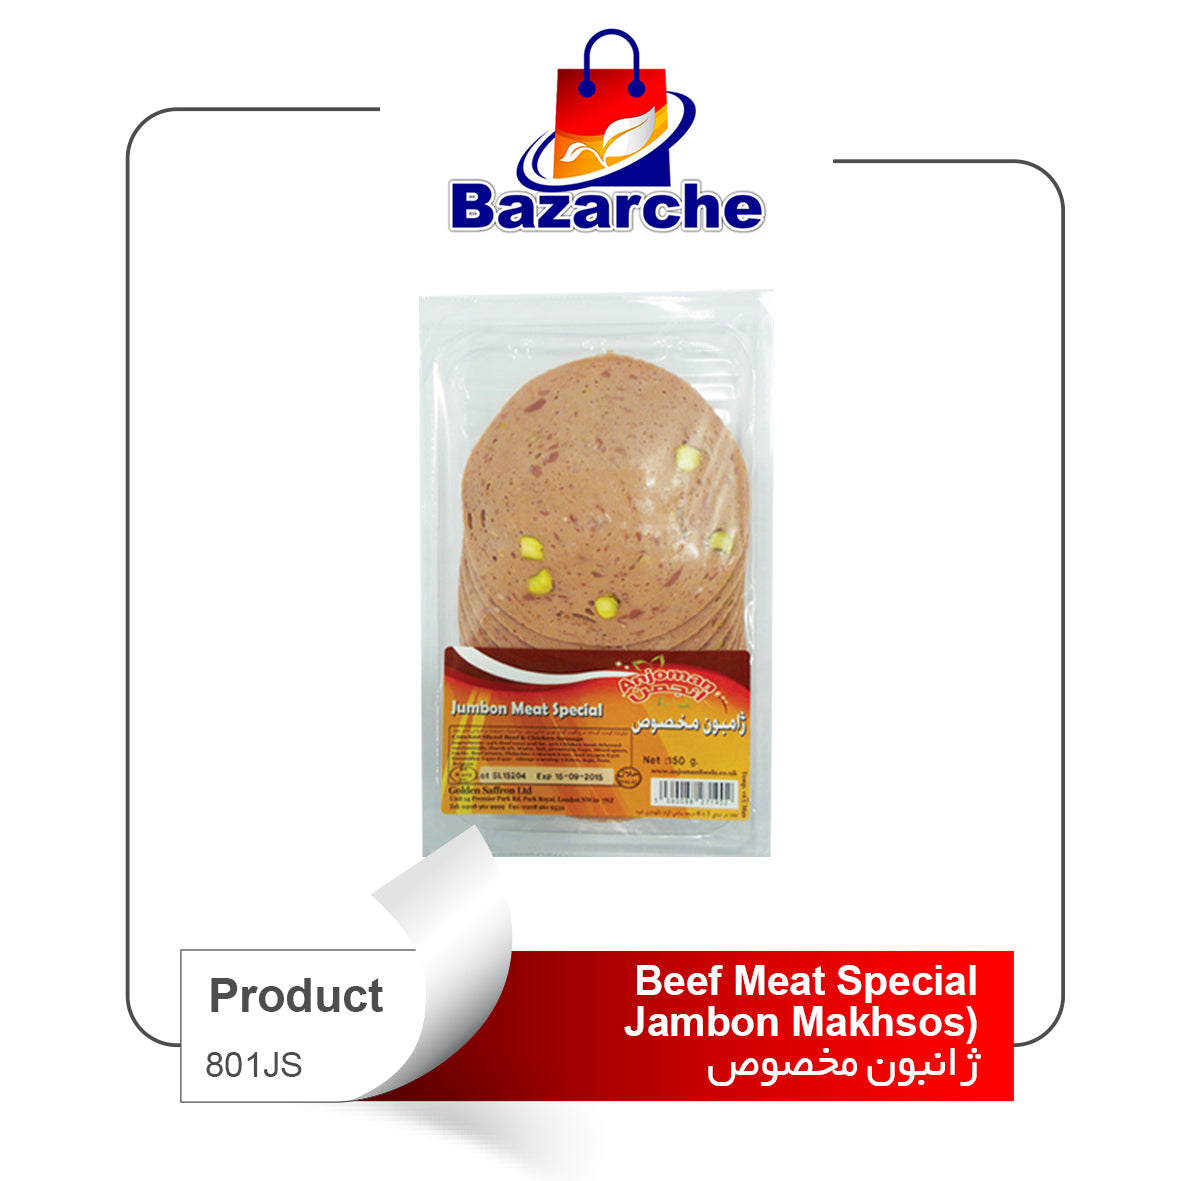 Beef Meat Special (ژامبون مخصوص)